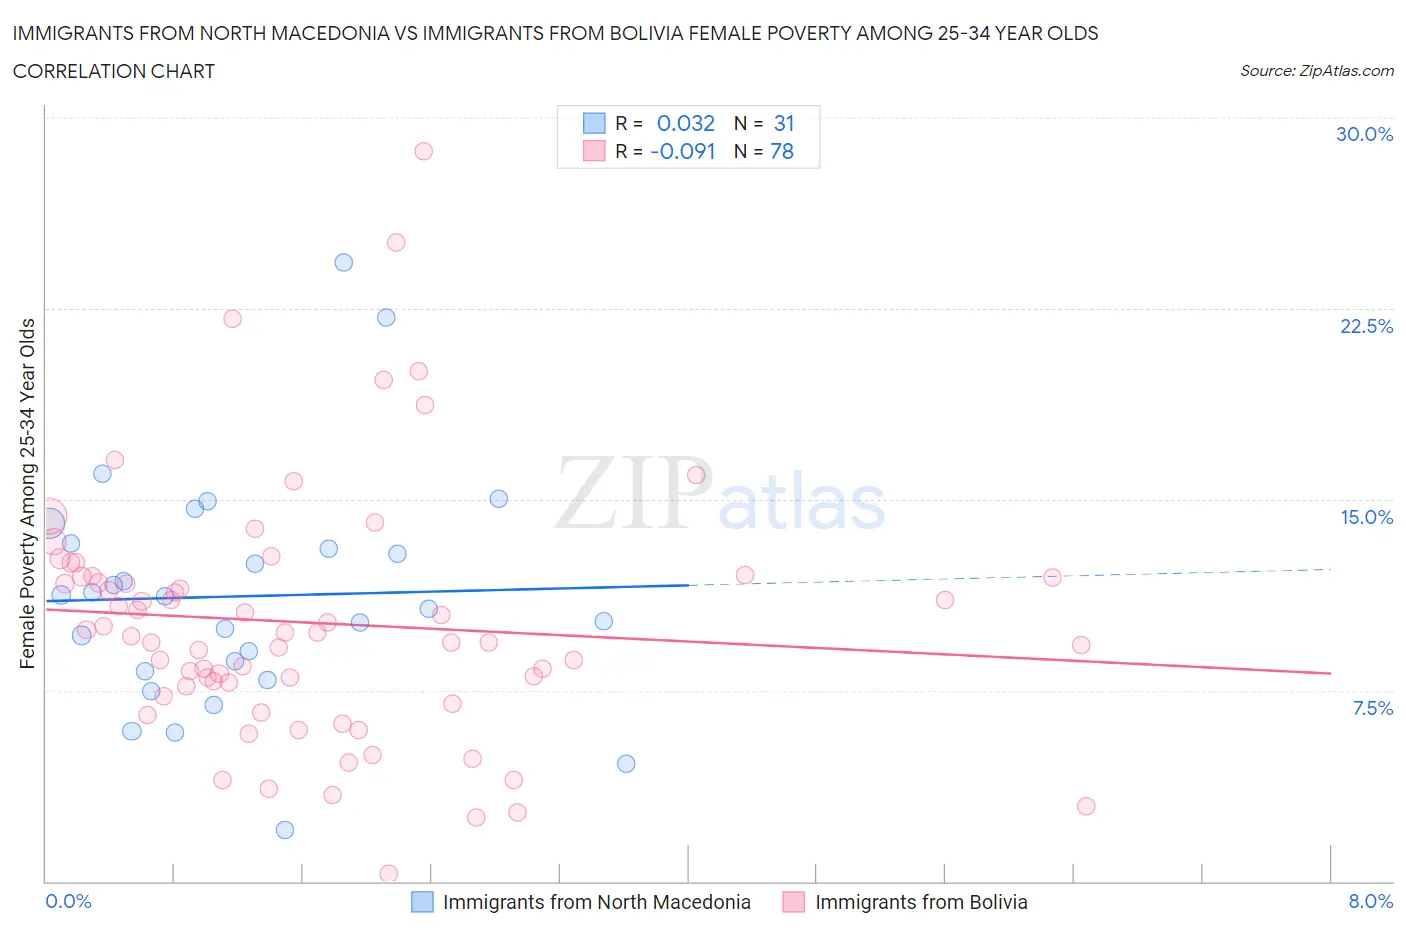 Immigrants from North Macedonia vs Immigrants from Bolivia Female Poverty Among 25-34 Year Olds